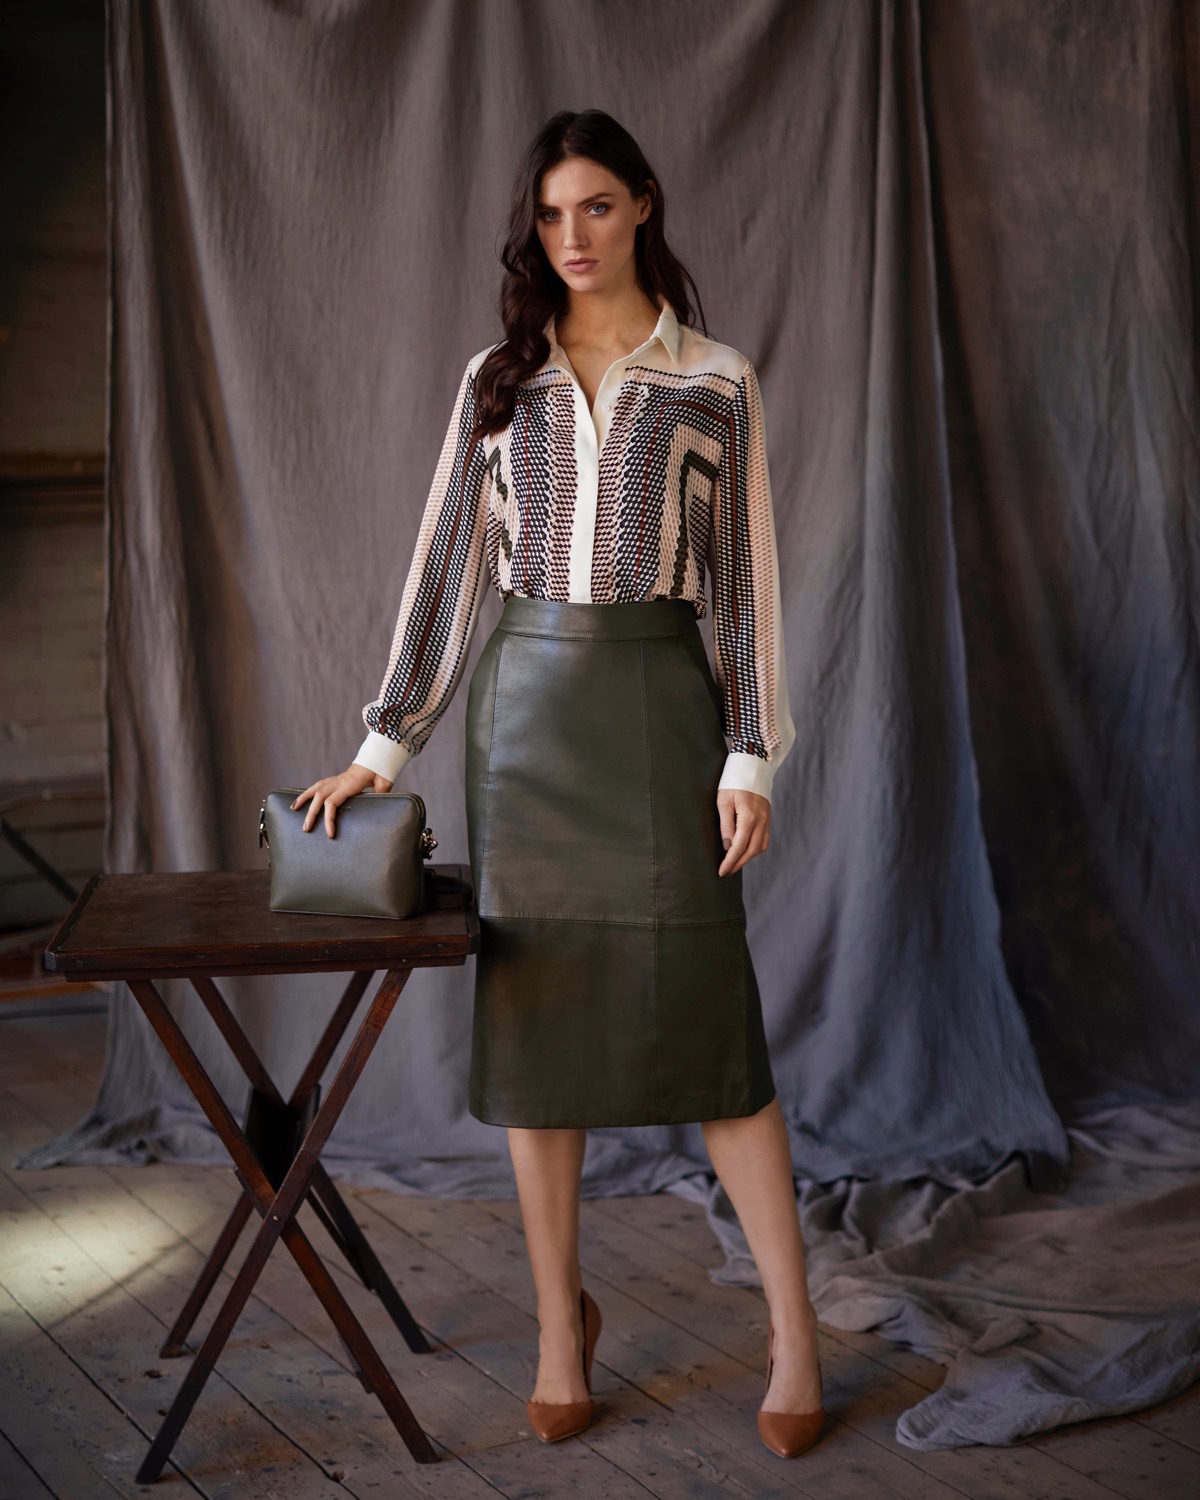 10 Elegant Pencil Skirts For Professional Look | Green leather pencil skirt,  Green leather skirt, Fashion